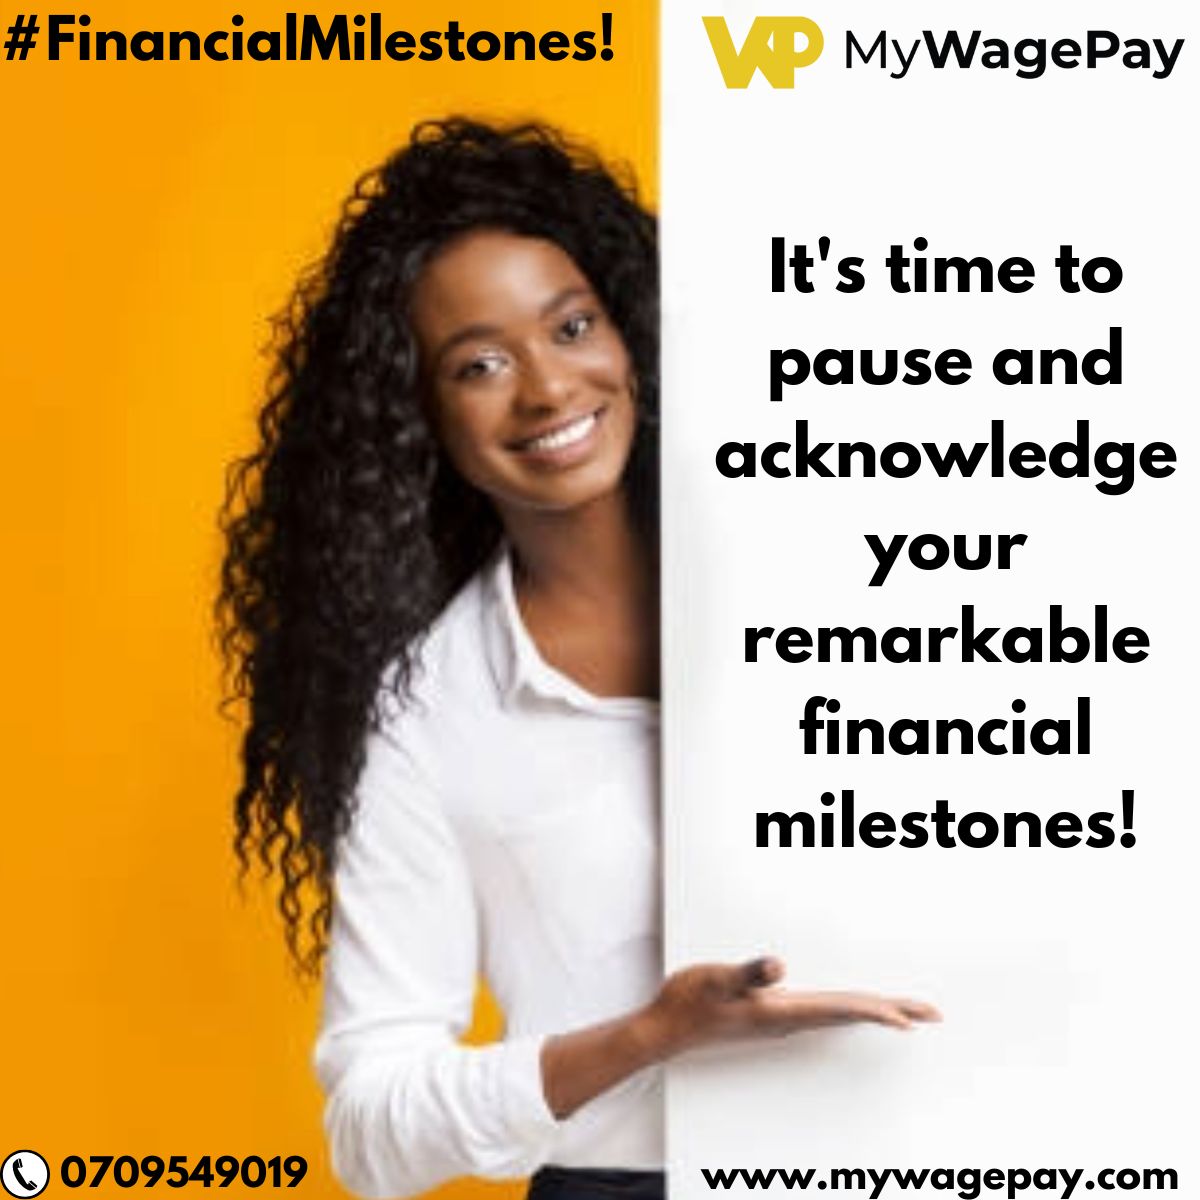 On this Monday, let's hit pause and give credit where it's due—to your remarkable financial milestones! Share your proudest financial win in the comments below. Here's to celebrating your journey together!
#financialsuccess #mondaymilestones #celebrateyourwins #Mywagepay